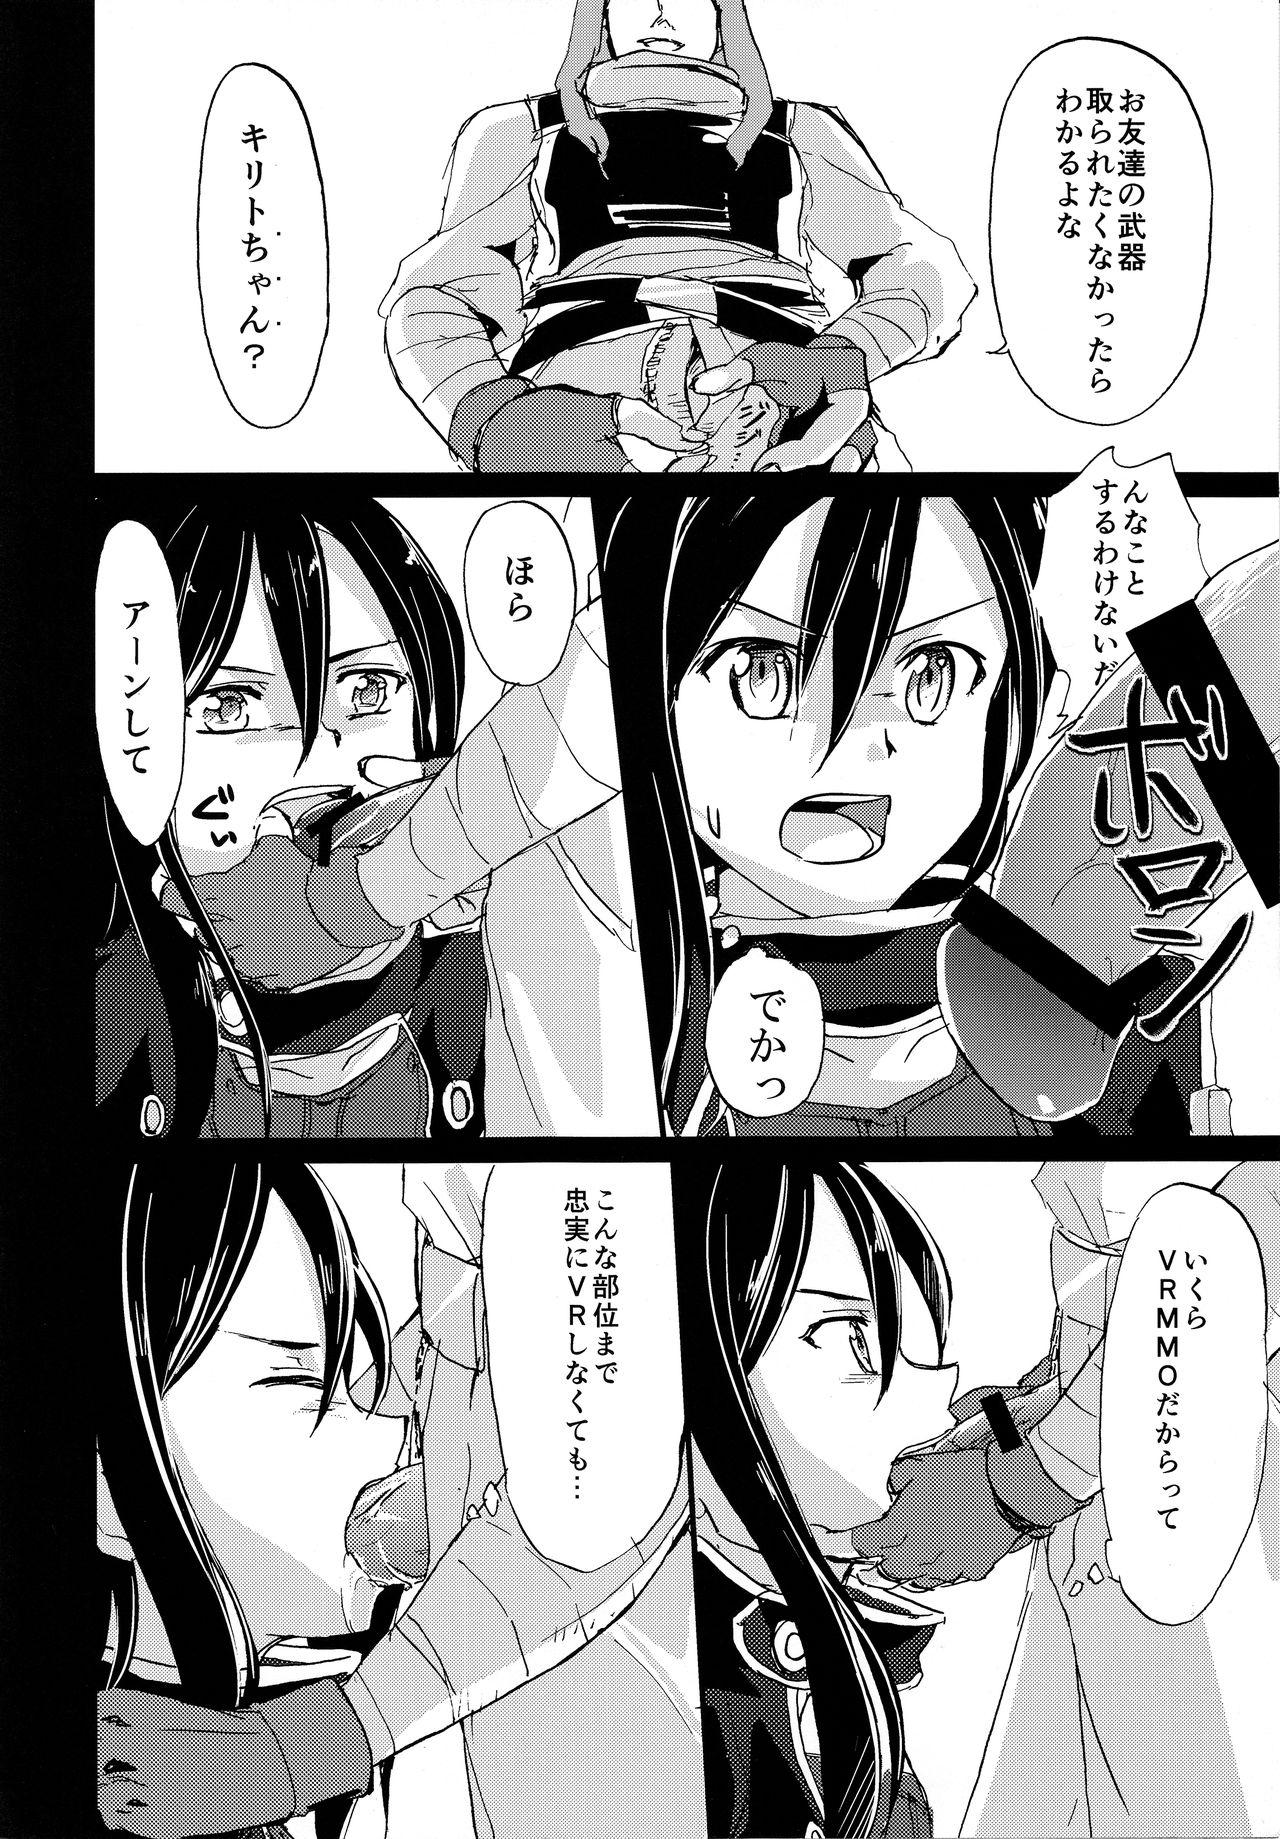 Twinks NO ESCAPE - Sword art online Play - Page 11